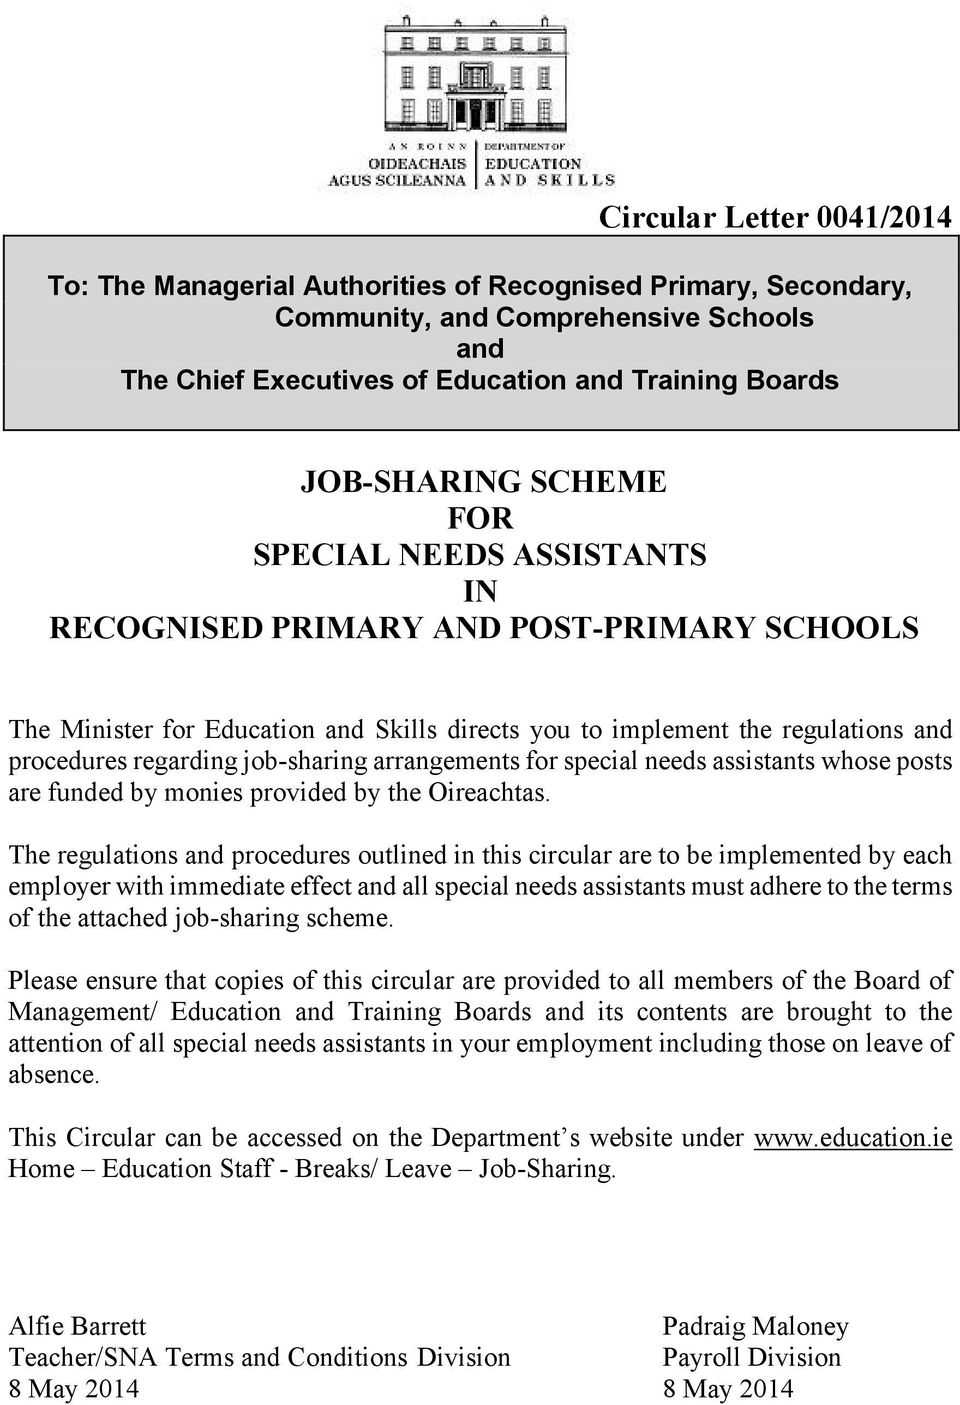 arrangements for special needs assistants whose posts are funded by monies provided by the Oireachtas.